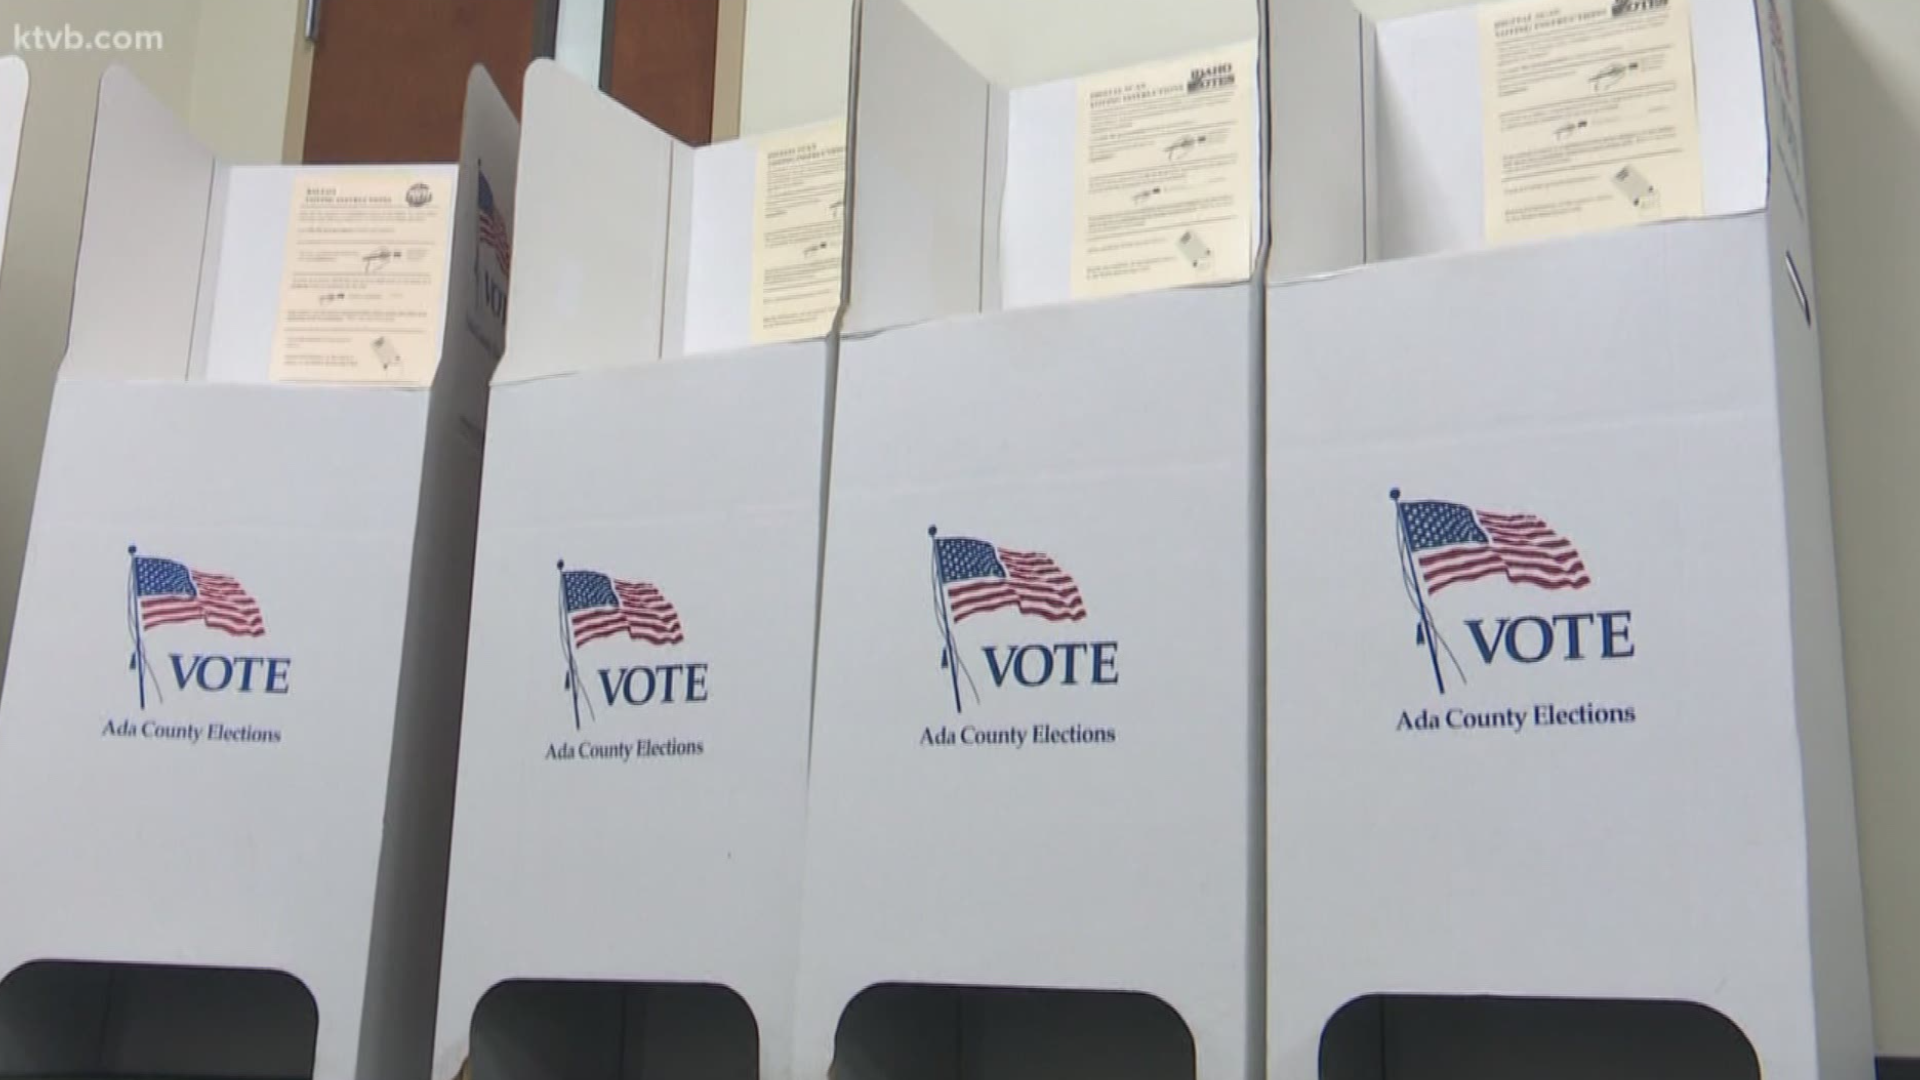 Voters across Idaho will go to the polls Tuesday to pick nominees for president. Many voters will also be asked to approve school funding requests.